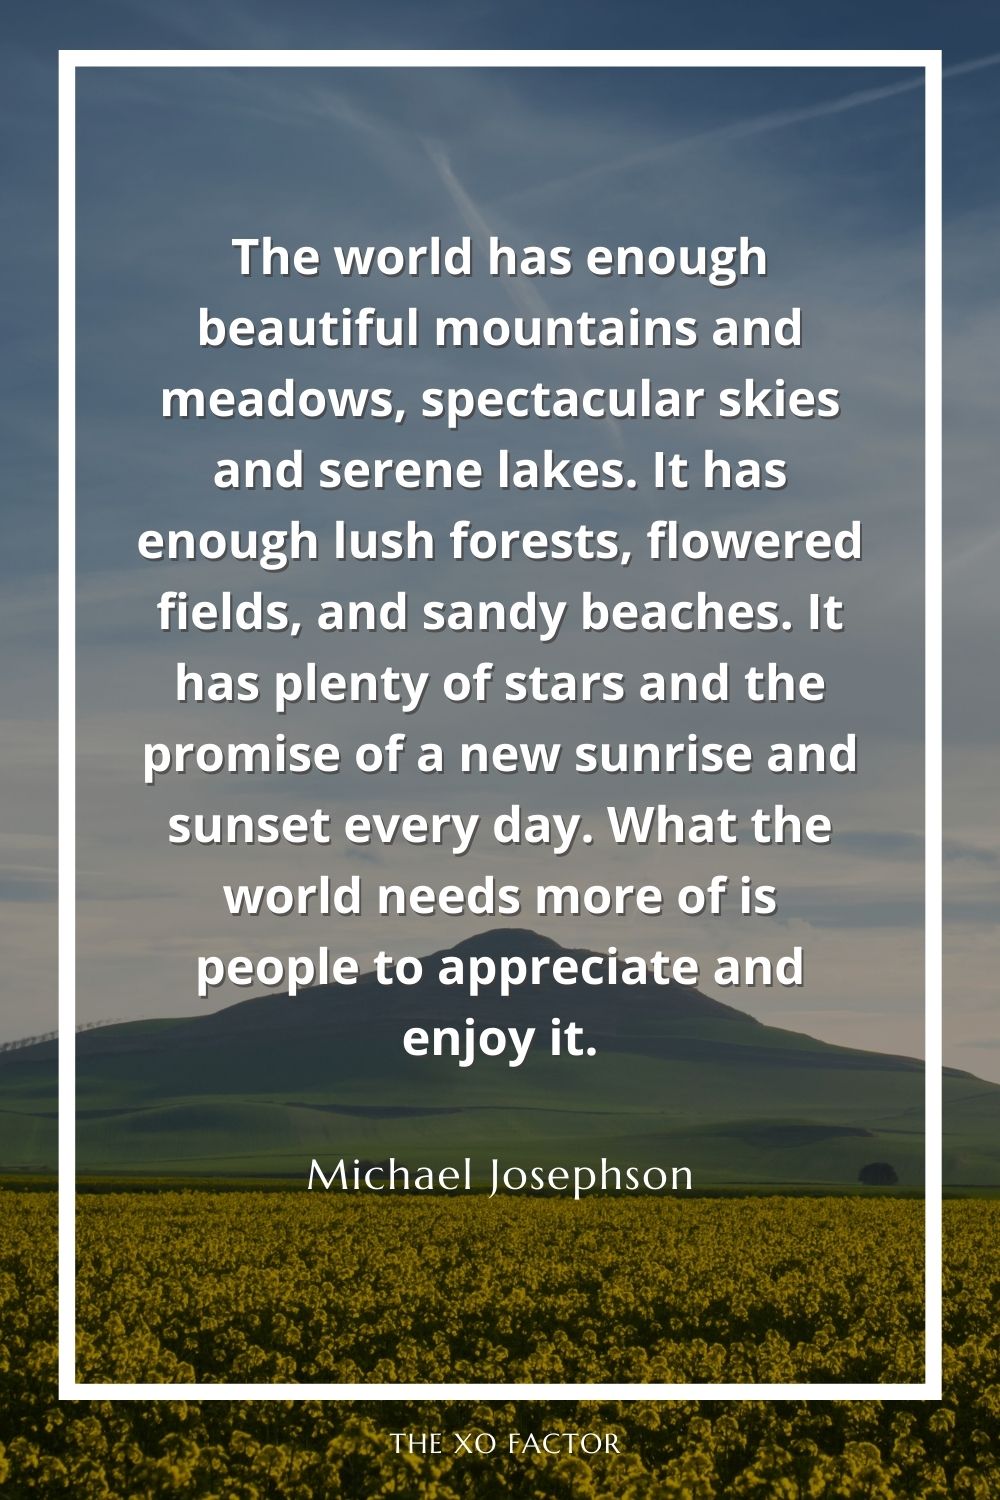 The world has enough beautiful mountains and meadows, spectacular skies and serene lakes. It has enough lush forests, flowered fields, and sandy beaches. It has plenty of stars and the promise of a new sunrise and sunset every day. What the world needs more of is people to appreciate and enjoy it.